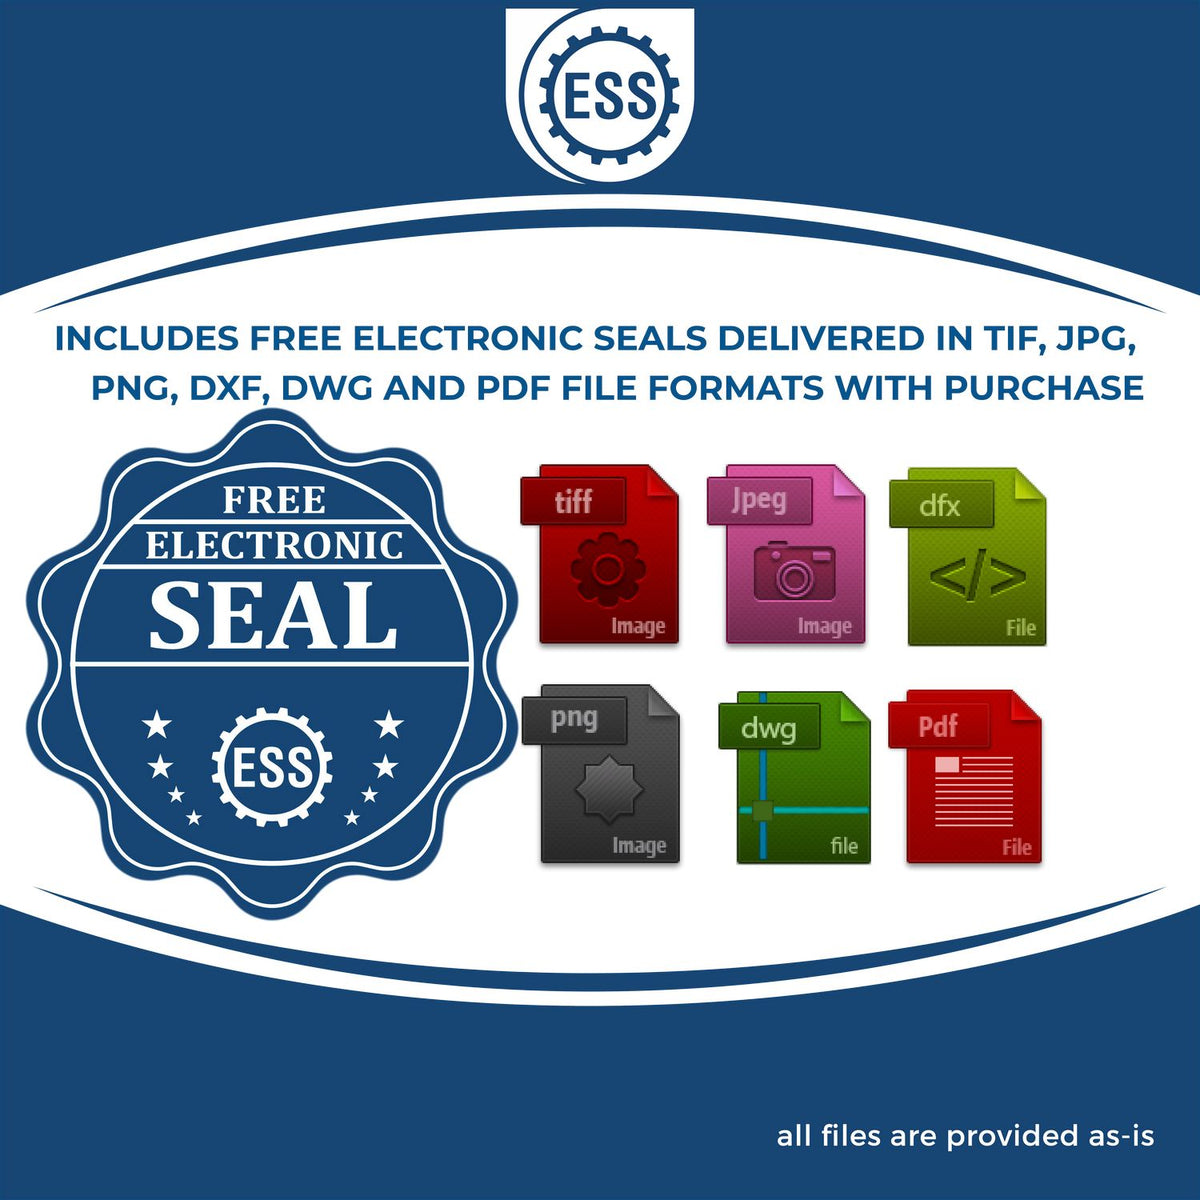 An infographic for the free electronic seal for the Hybrid Texas Geologist Seal illustrating the different file type icons such as DXF, DWG, TIF, JPG and PNG.